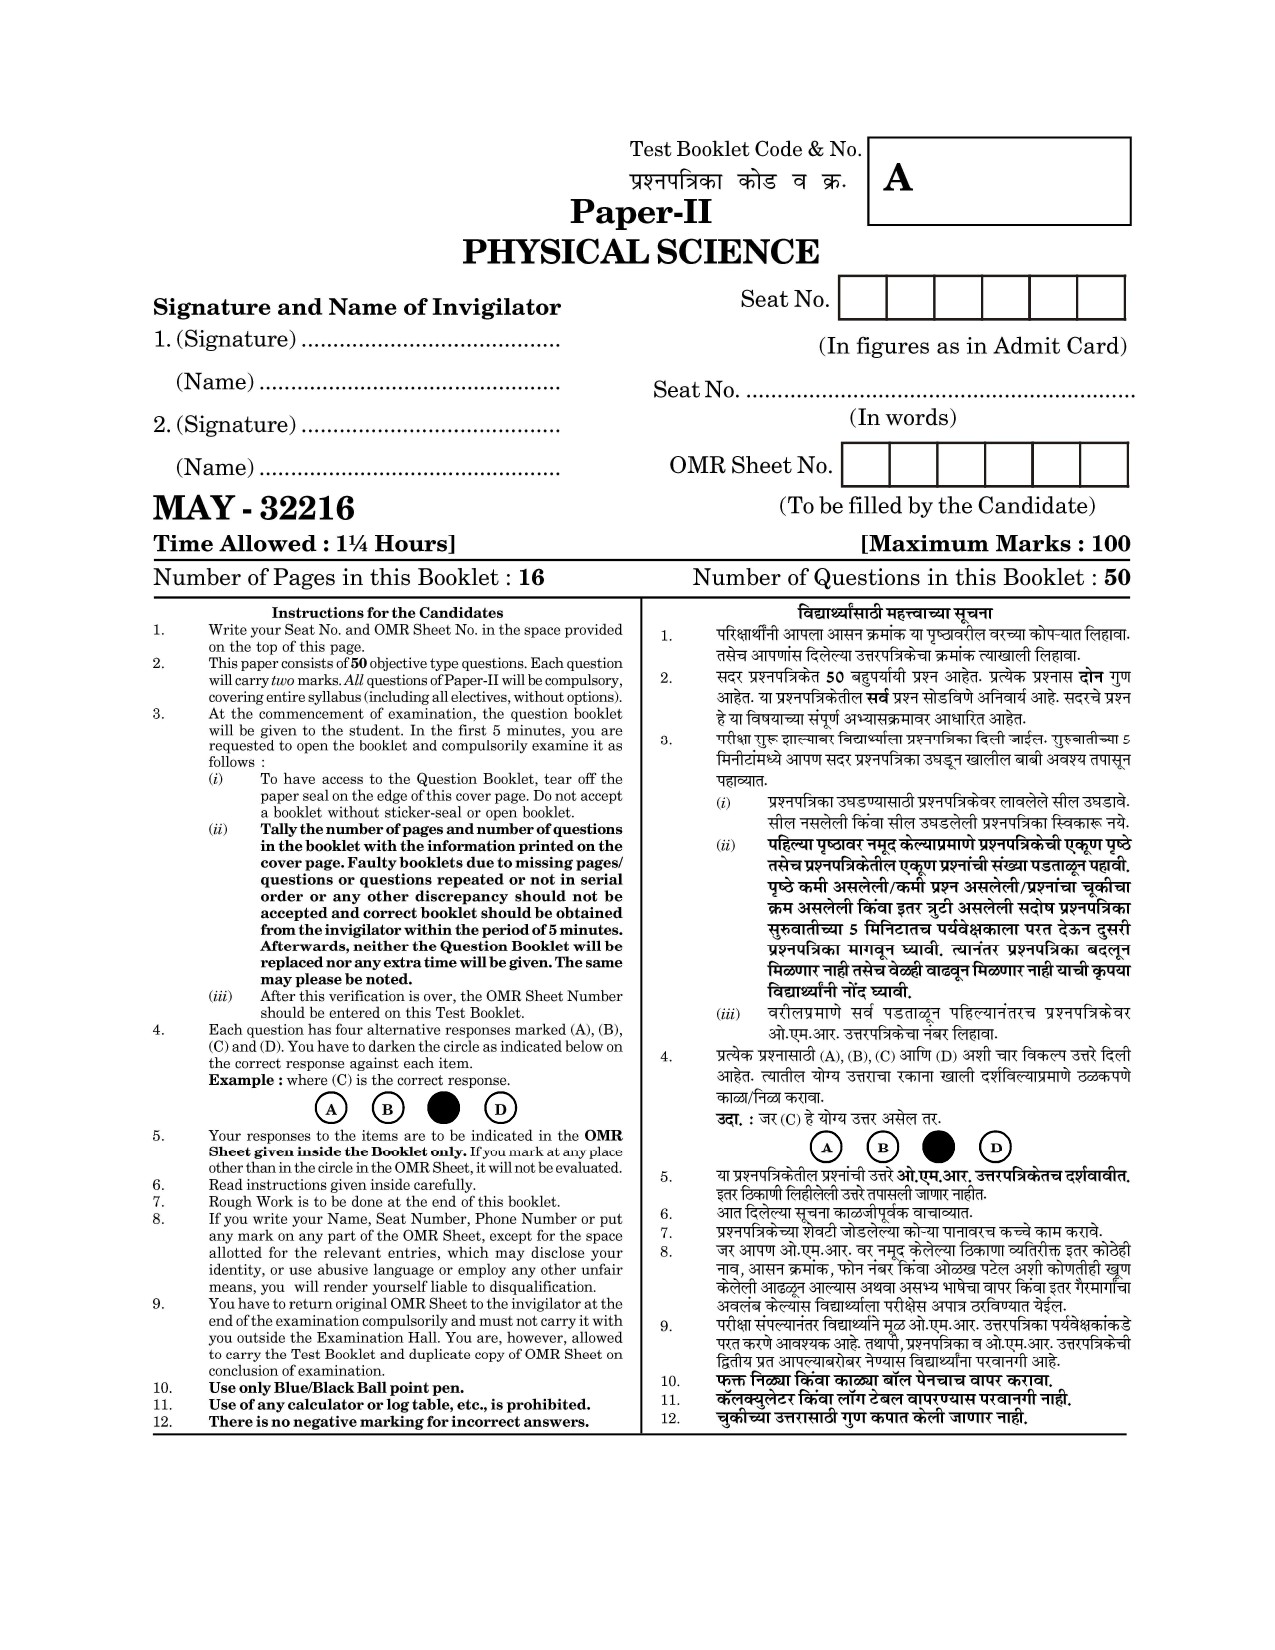 Maharashtra SET Physical Science Question Paper II May 2016 1